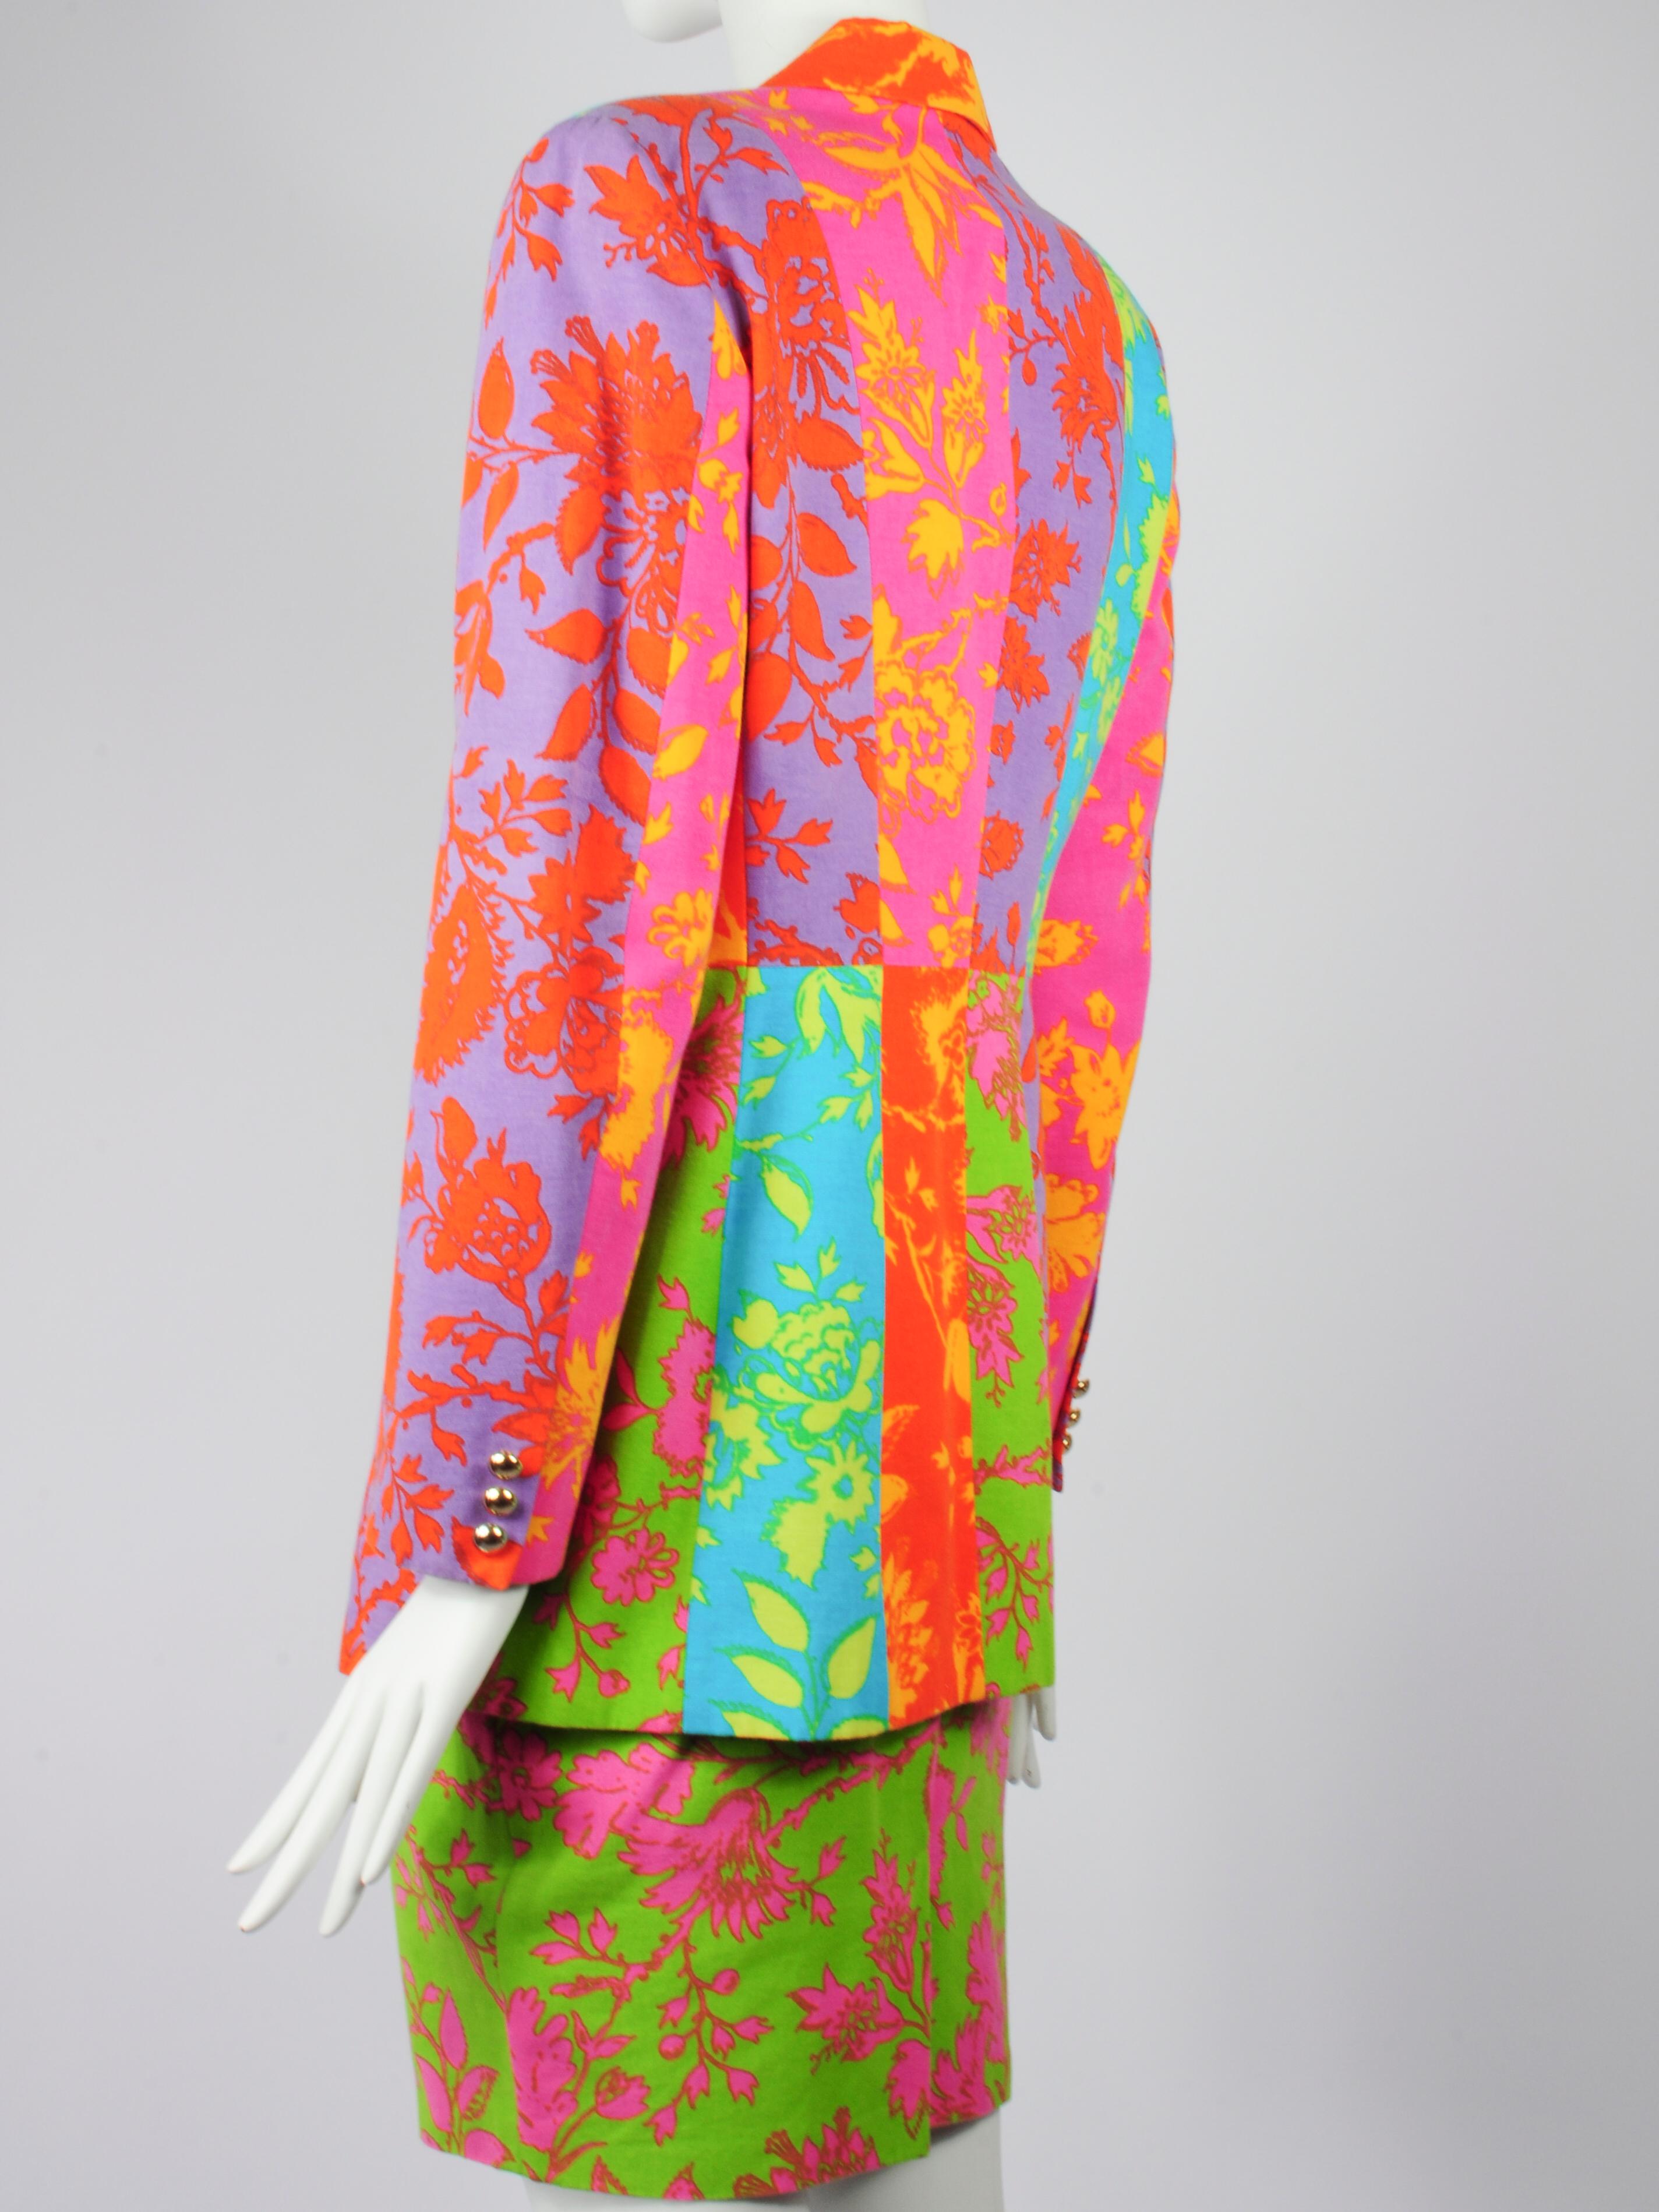 Women's Oliver by Valentino Multicolour Floral Patchwork Pencilskirt Suit 1990s For Sale